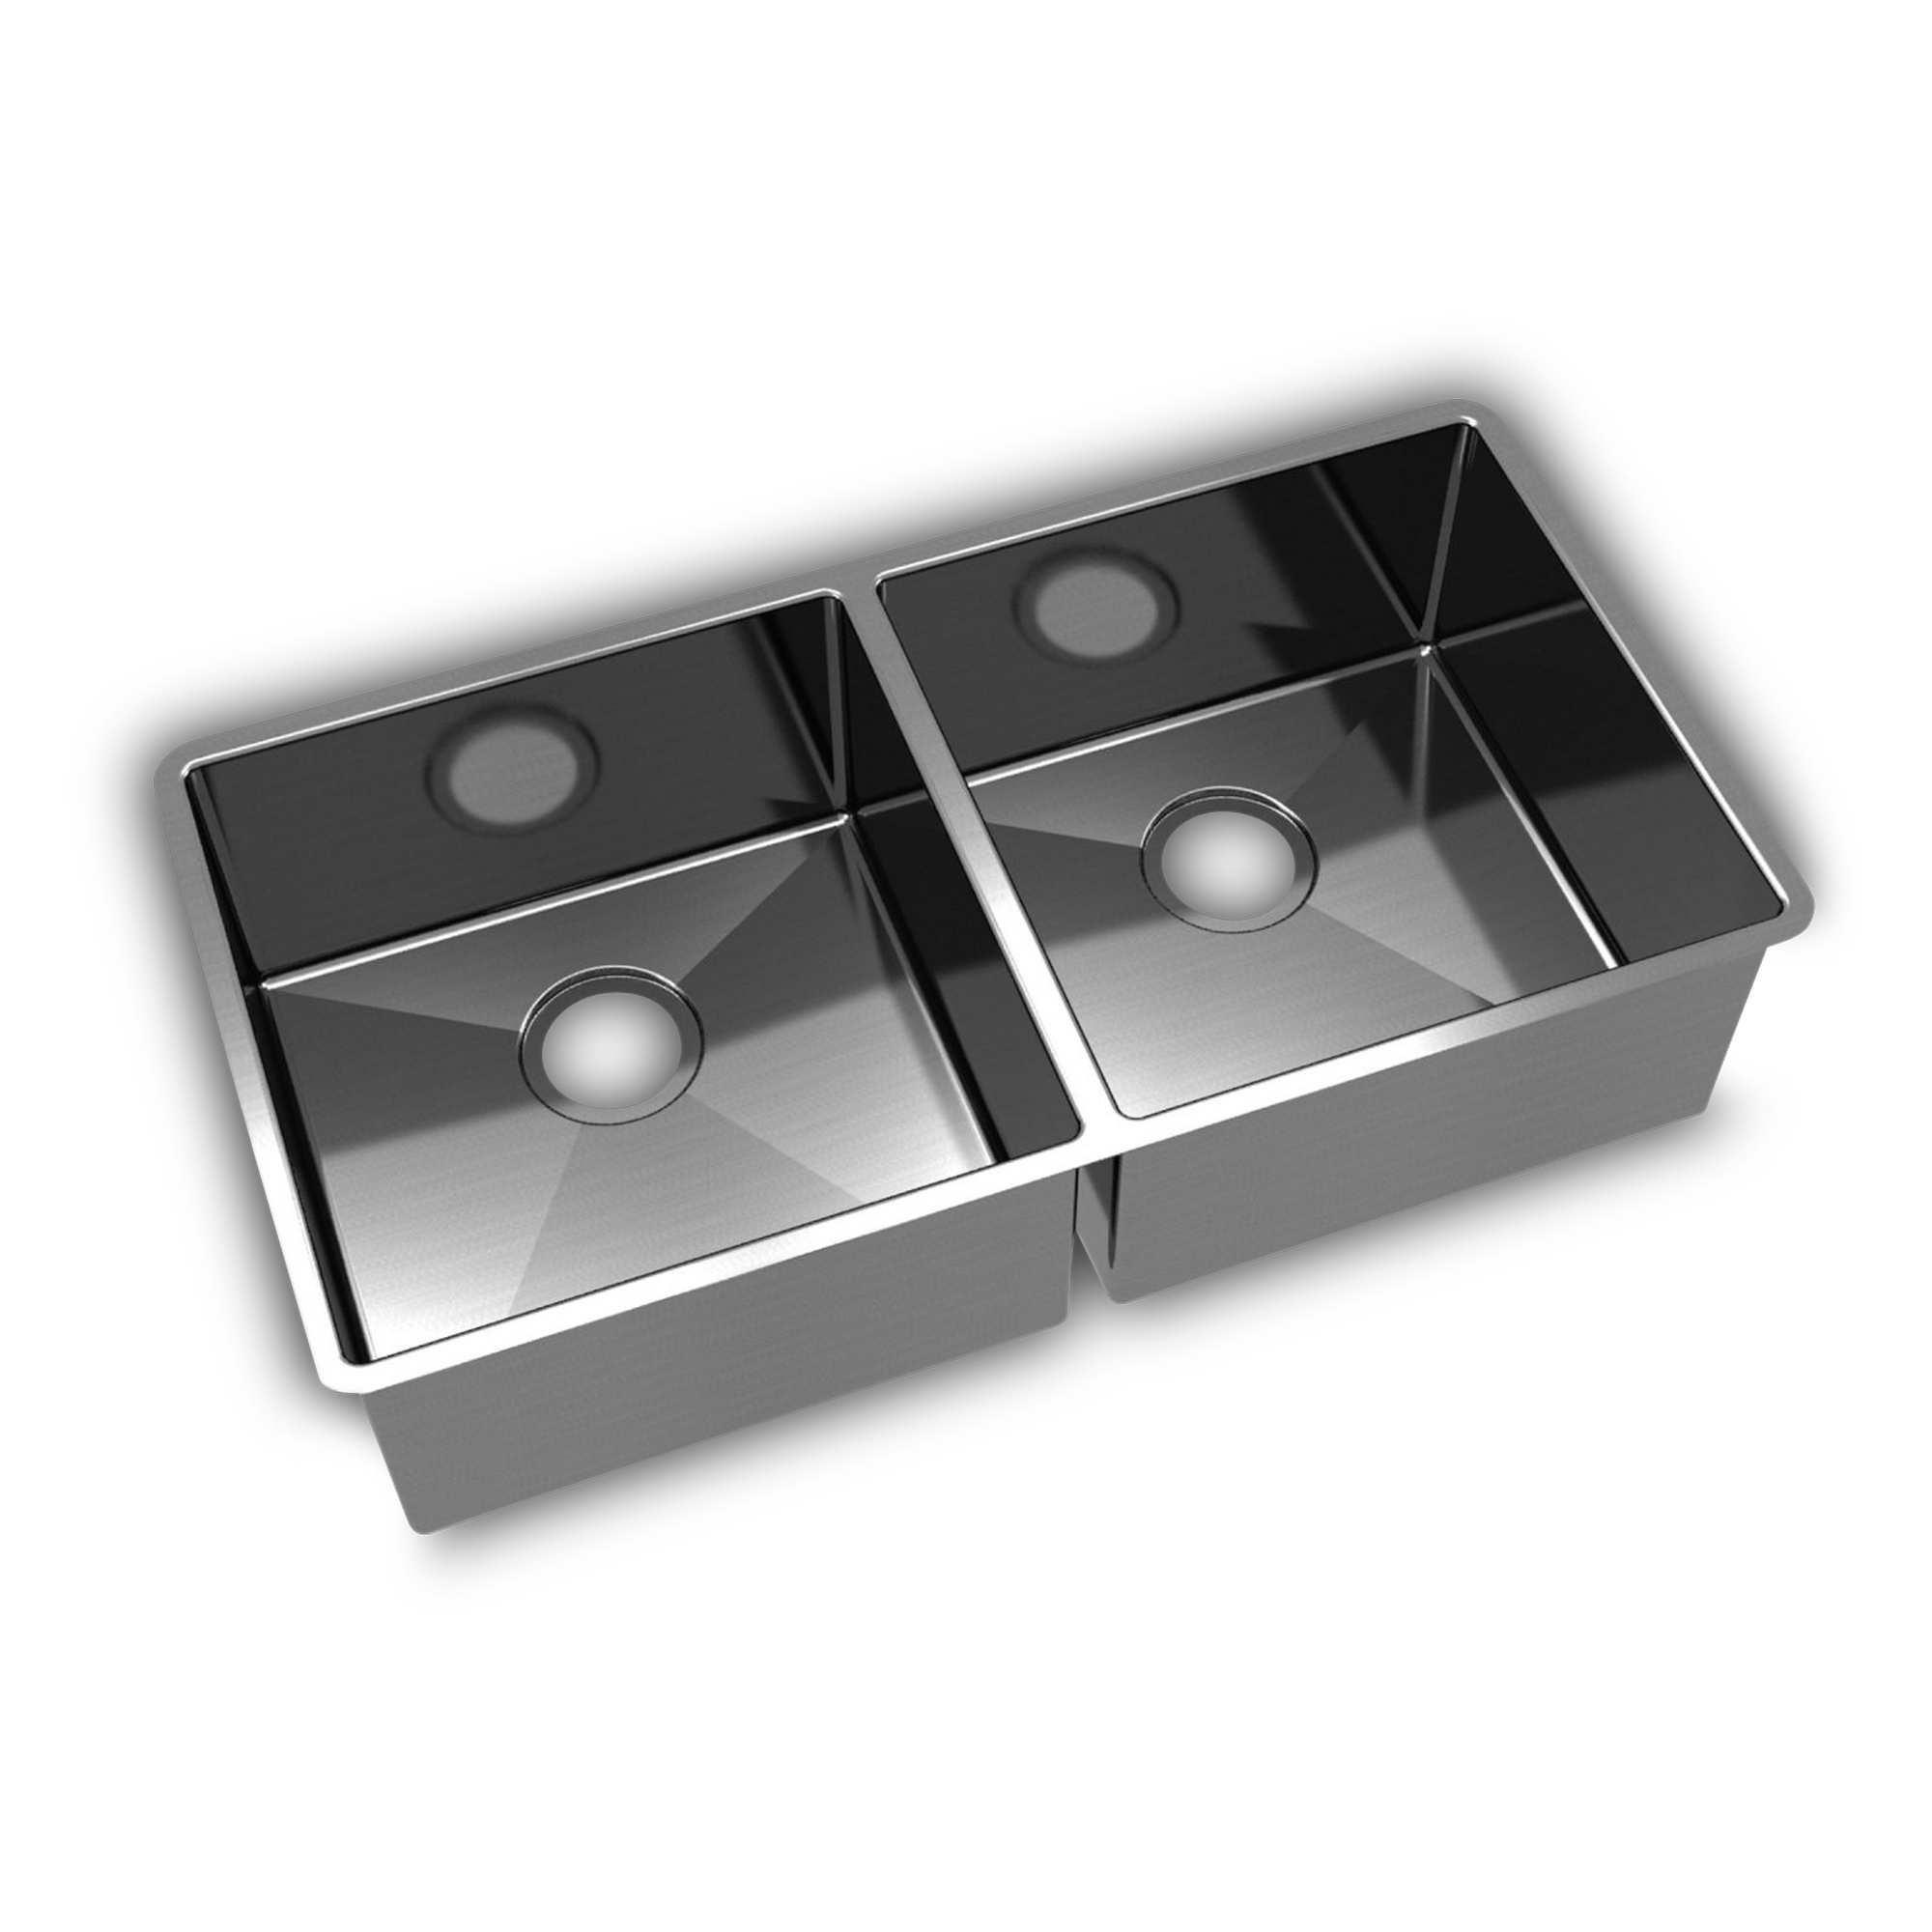 A simple and classic double sink for under mount installation.